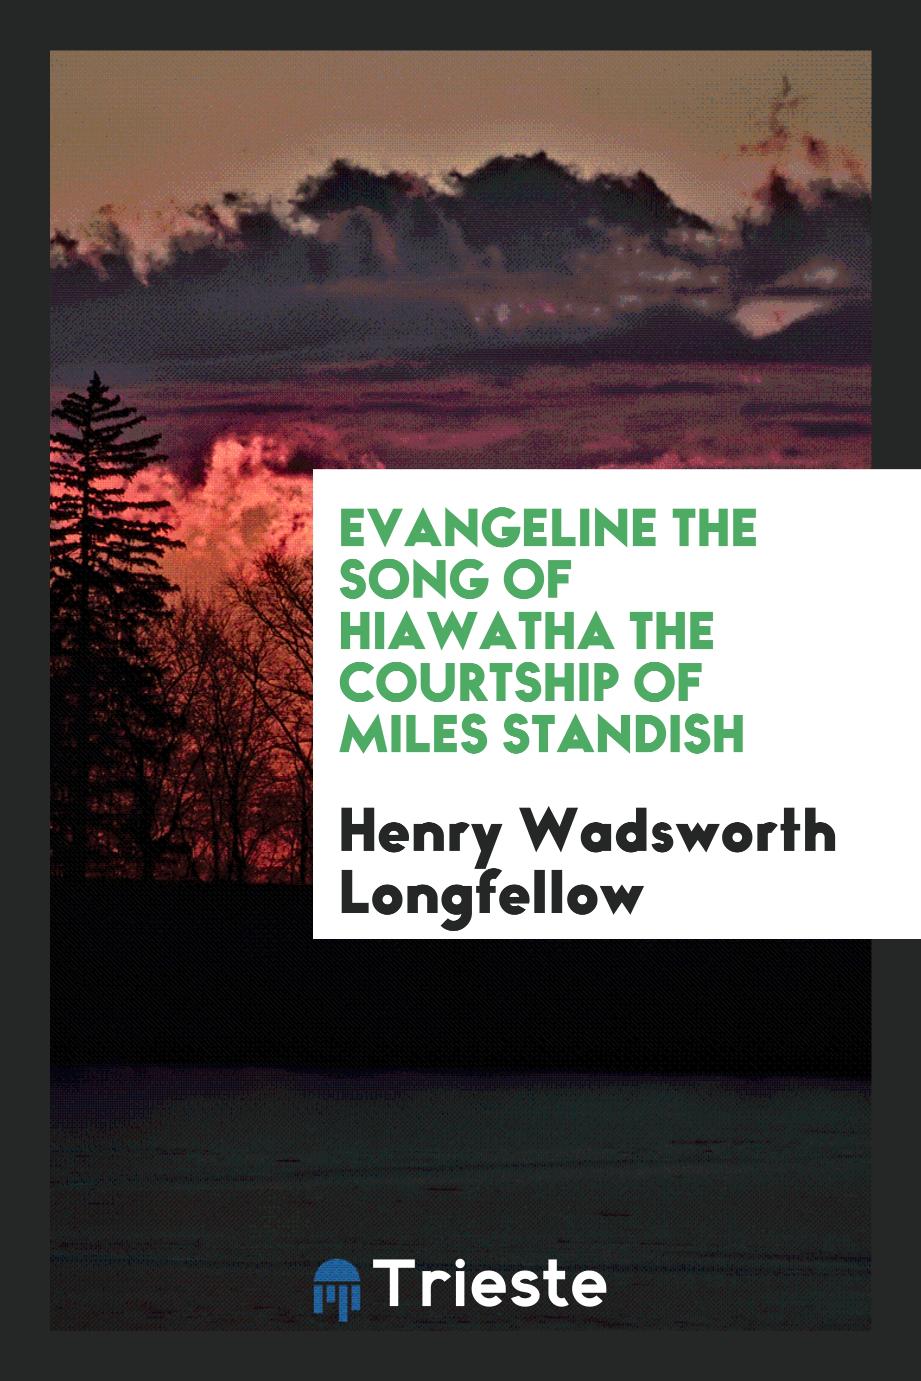 Evangeline the Song of Hiawatha the Courtship of Miles Standish